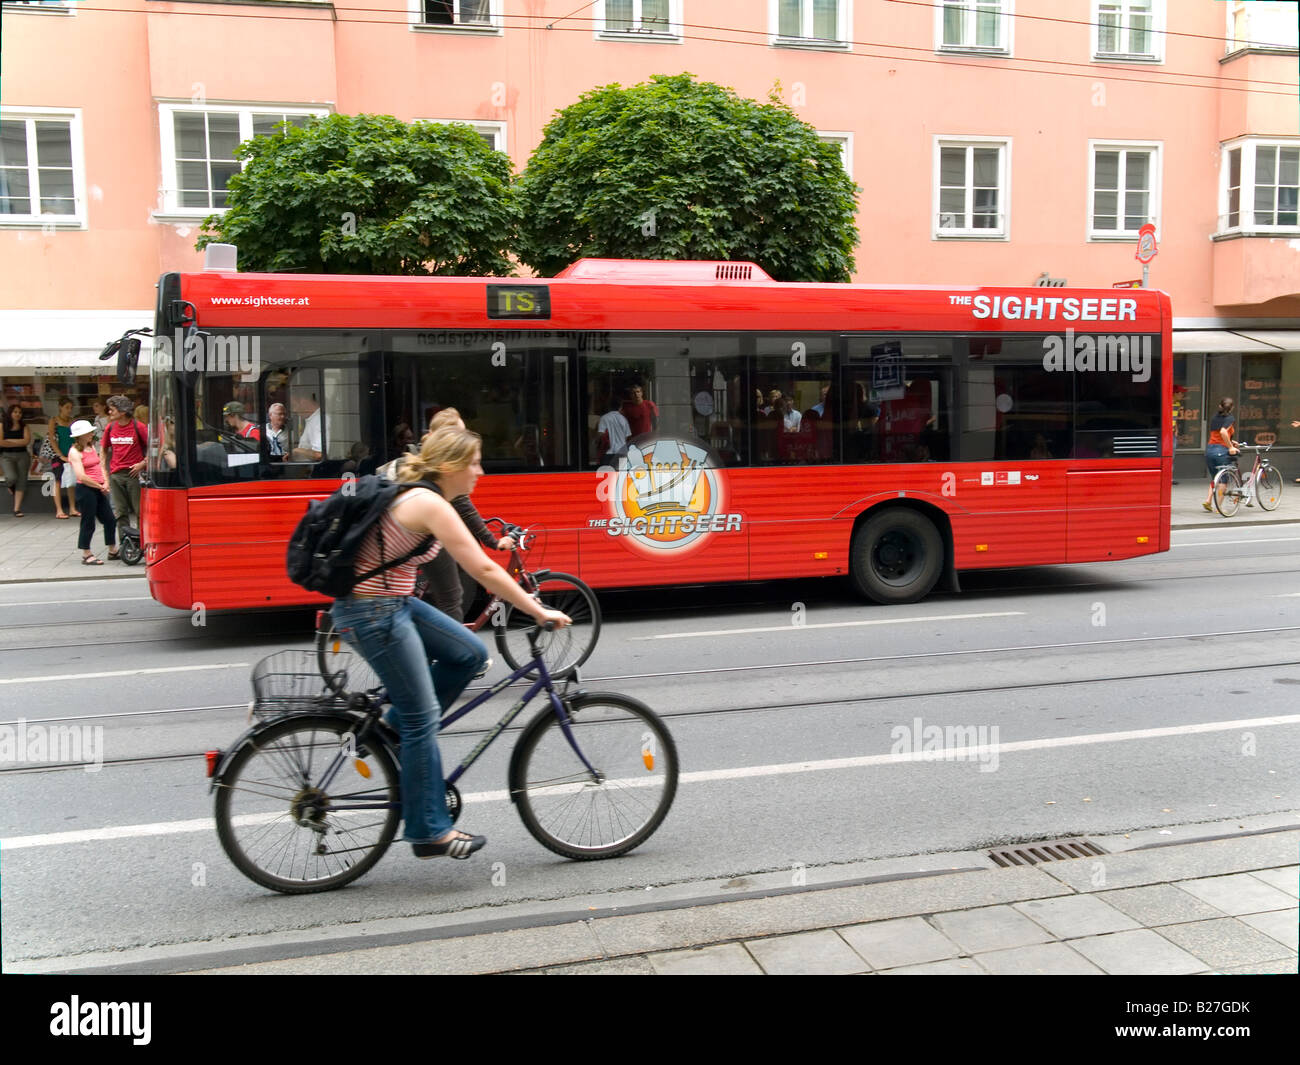 Sightseer bus a special service for tourists in Innsbruck Austria with passing young woman cyclist Stock Photo